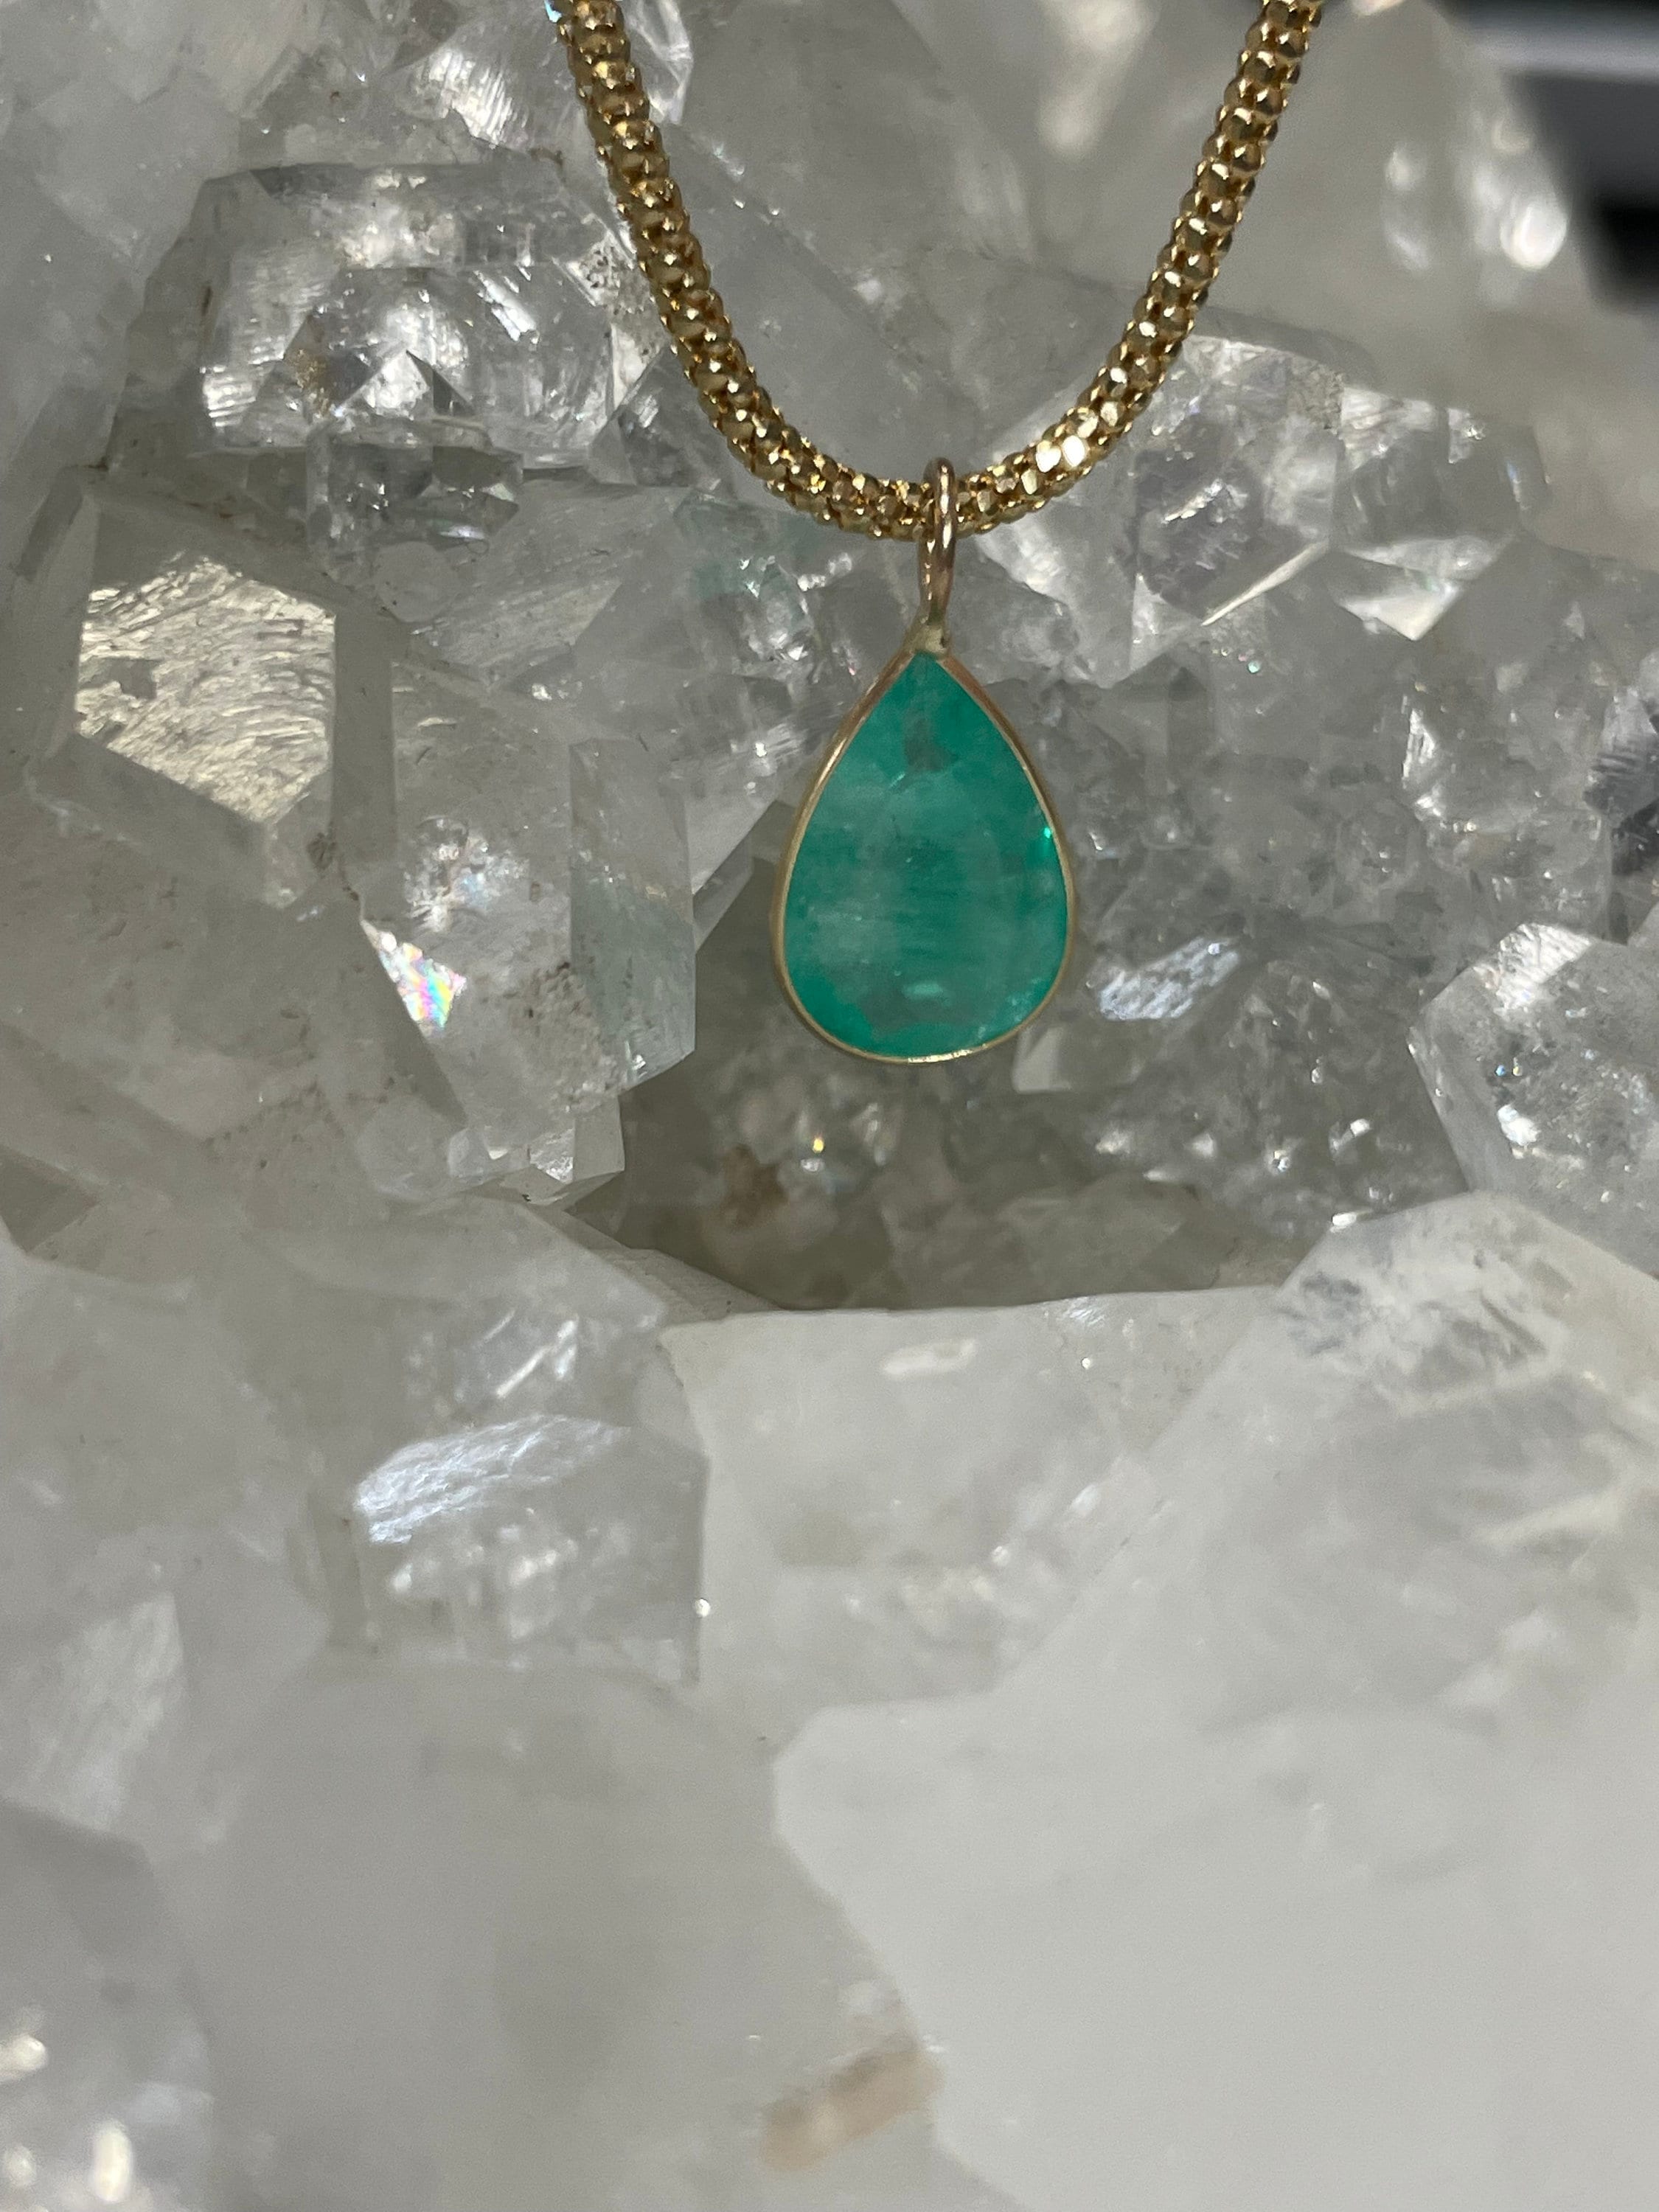 Shimmering! 2.9CT Natural Colombian Emerald 14K Yellow Gold Bezeled Charm Pendant OOAK 17x11mm